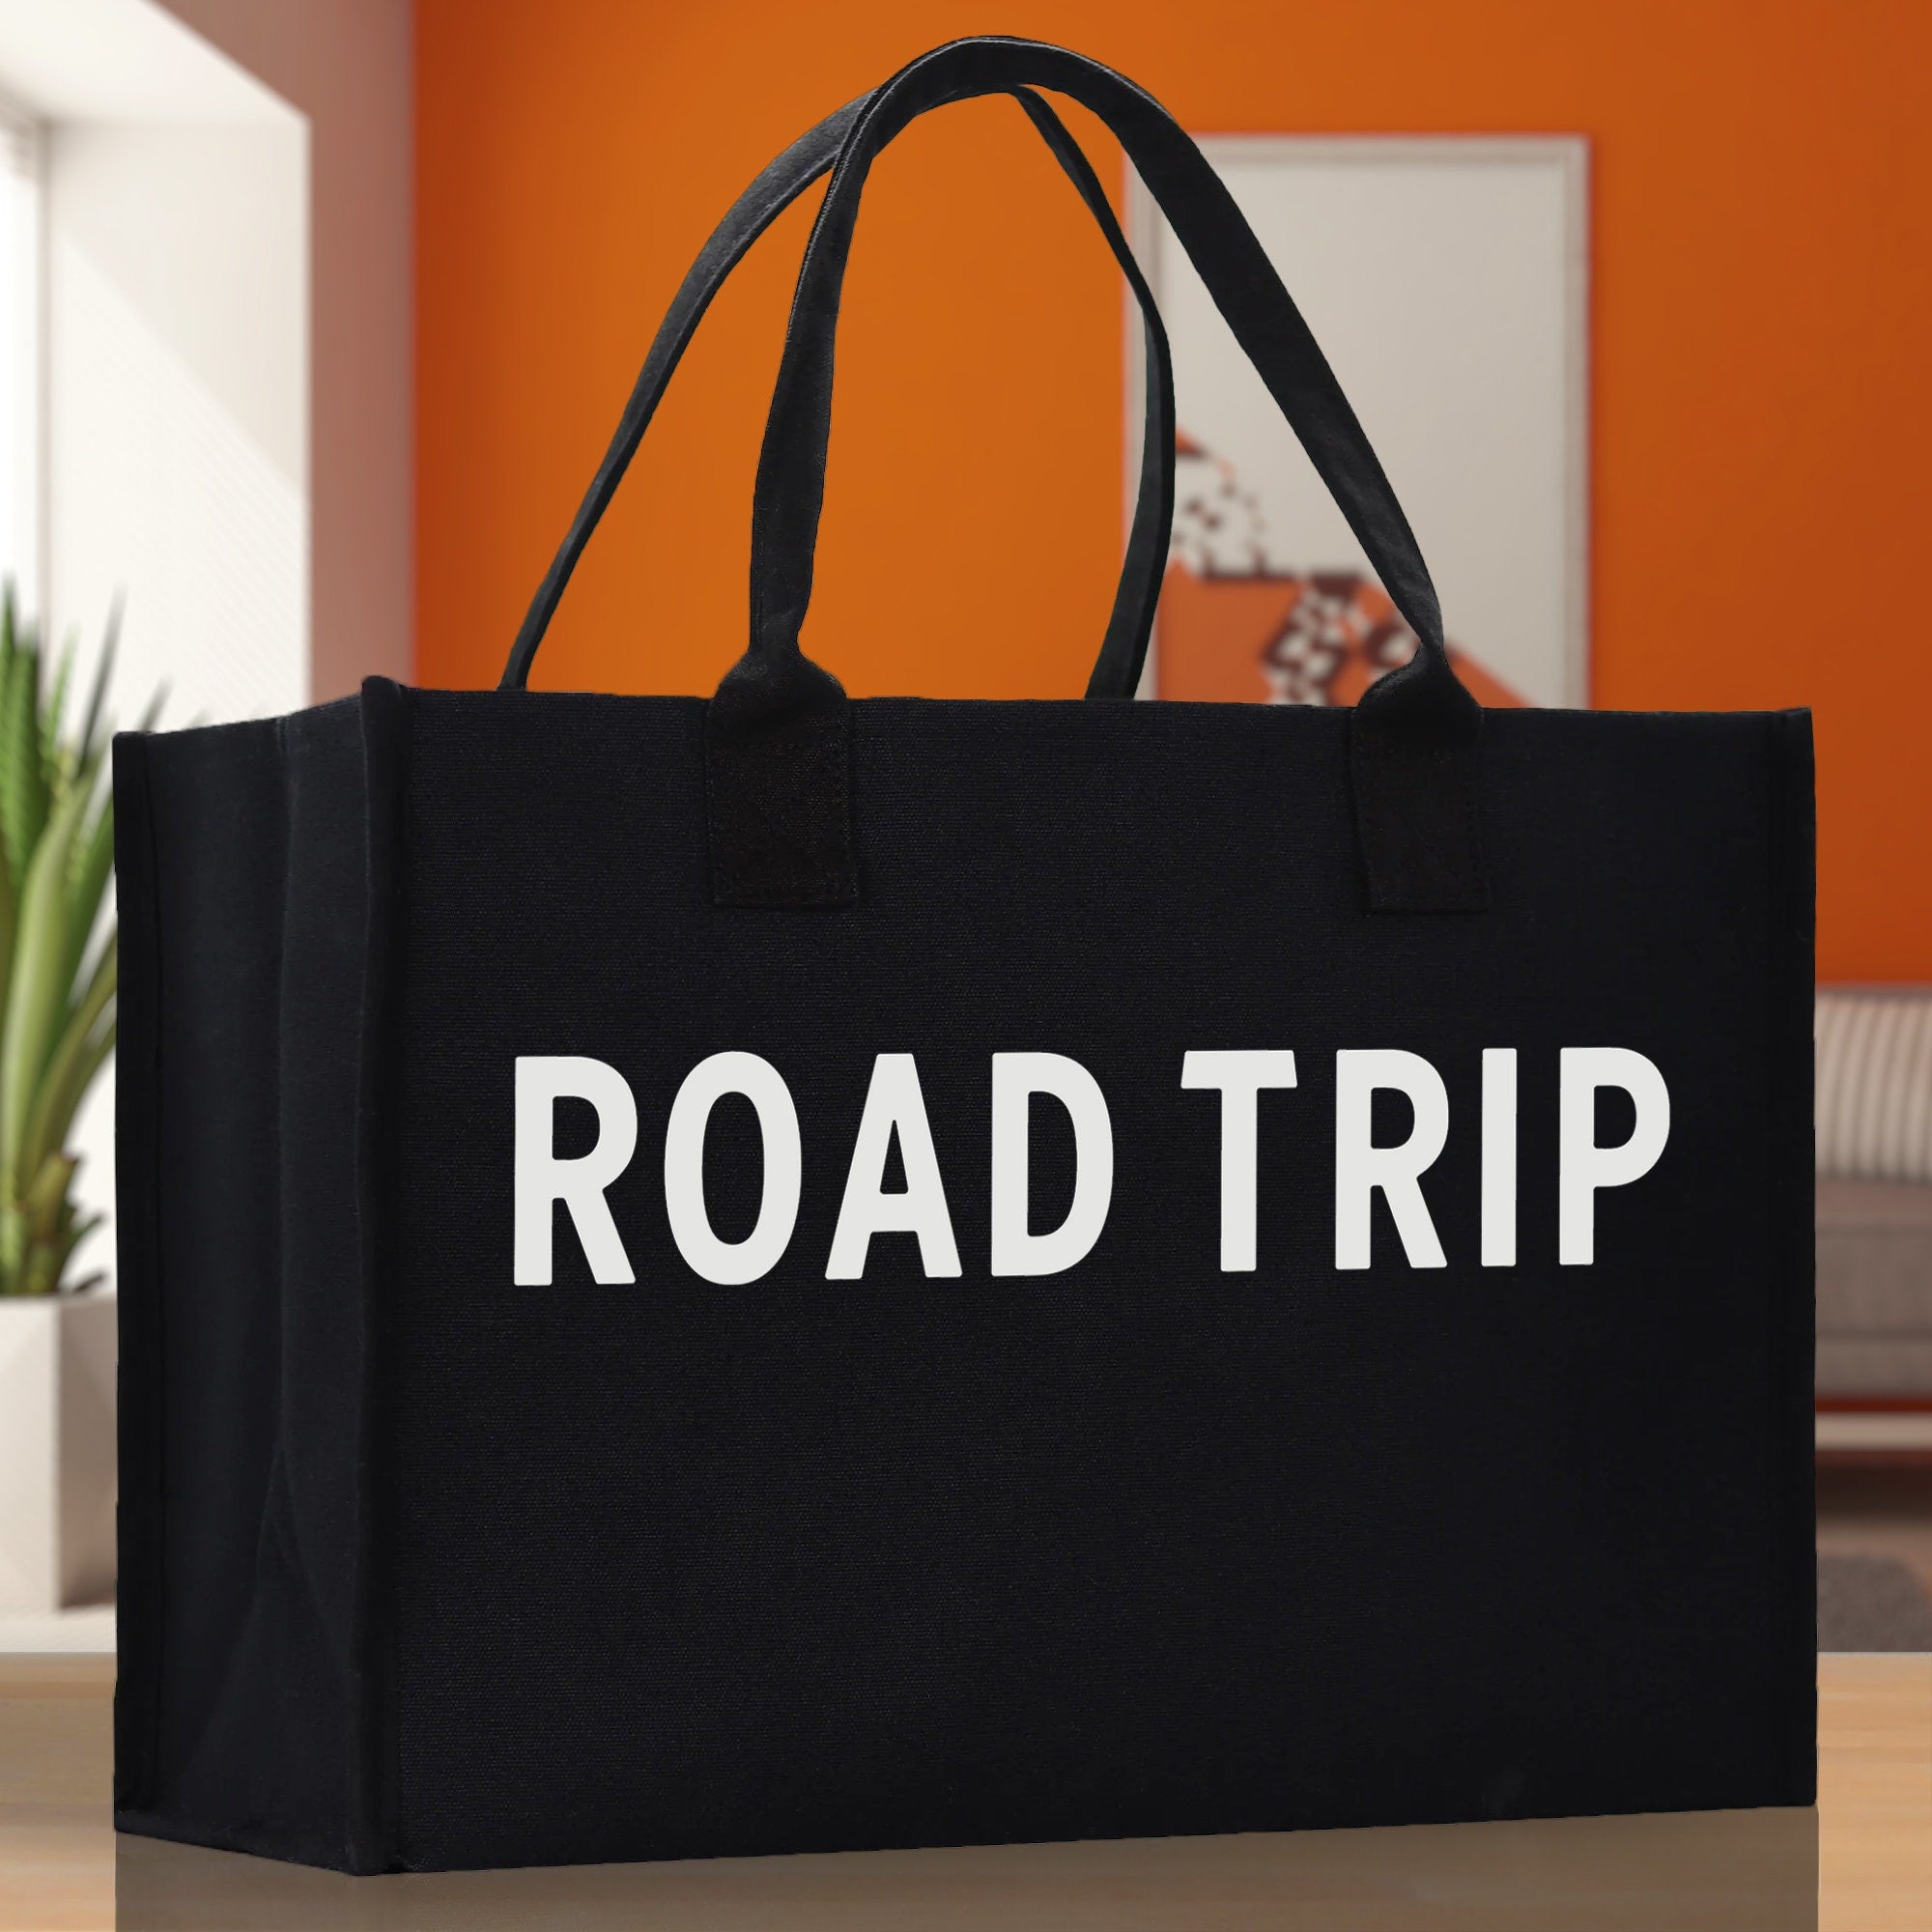 Road Trip Cotton Canvas Chic Beach Tote Bag Multipurpose Tote Weekender Tote Gift for Her Outdoor Tote Vacation Tote Large Beach Bag